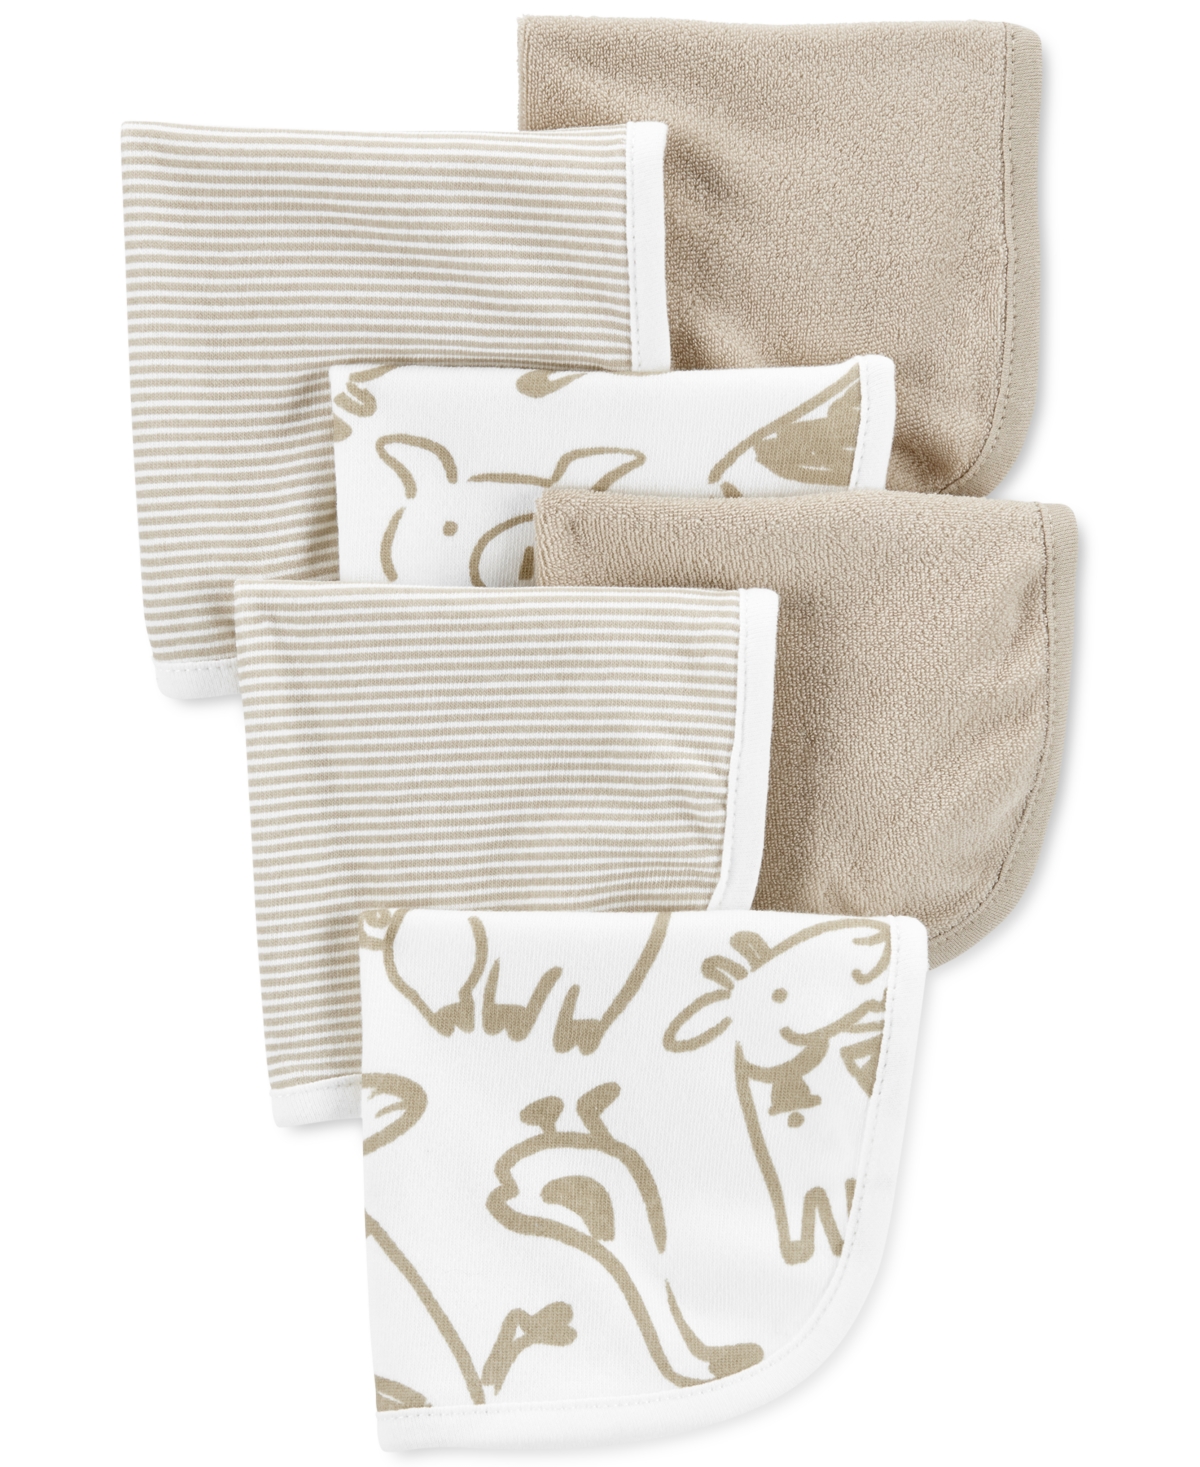 Carter's Baby Boys Or Baby Girls Assorted Wash Cloths, Pack Of 6 In Tan,ivory